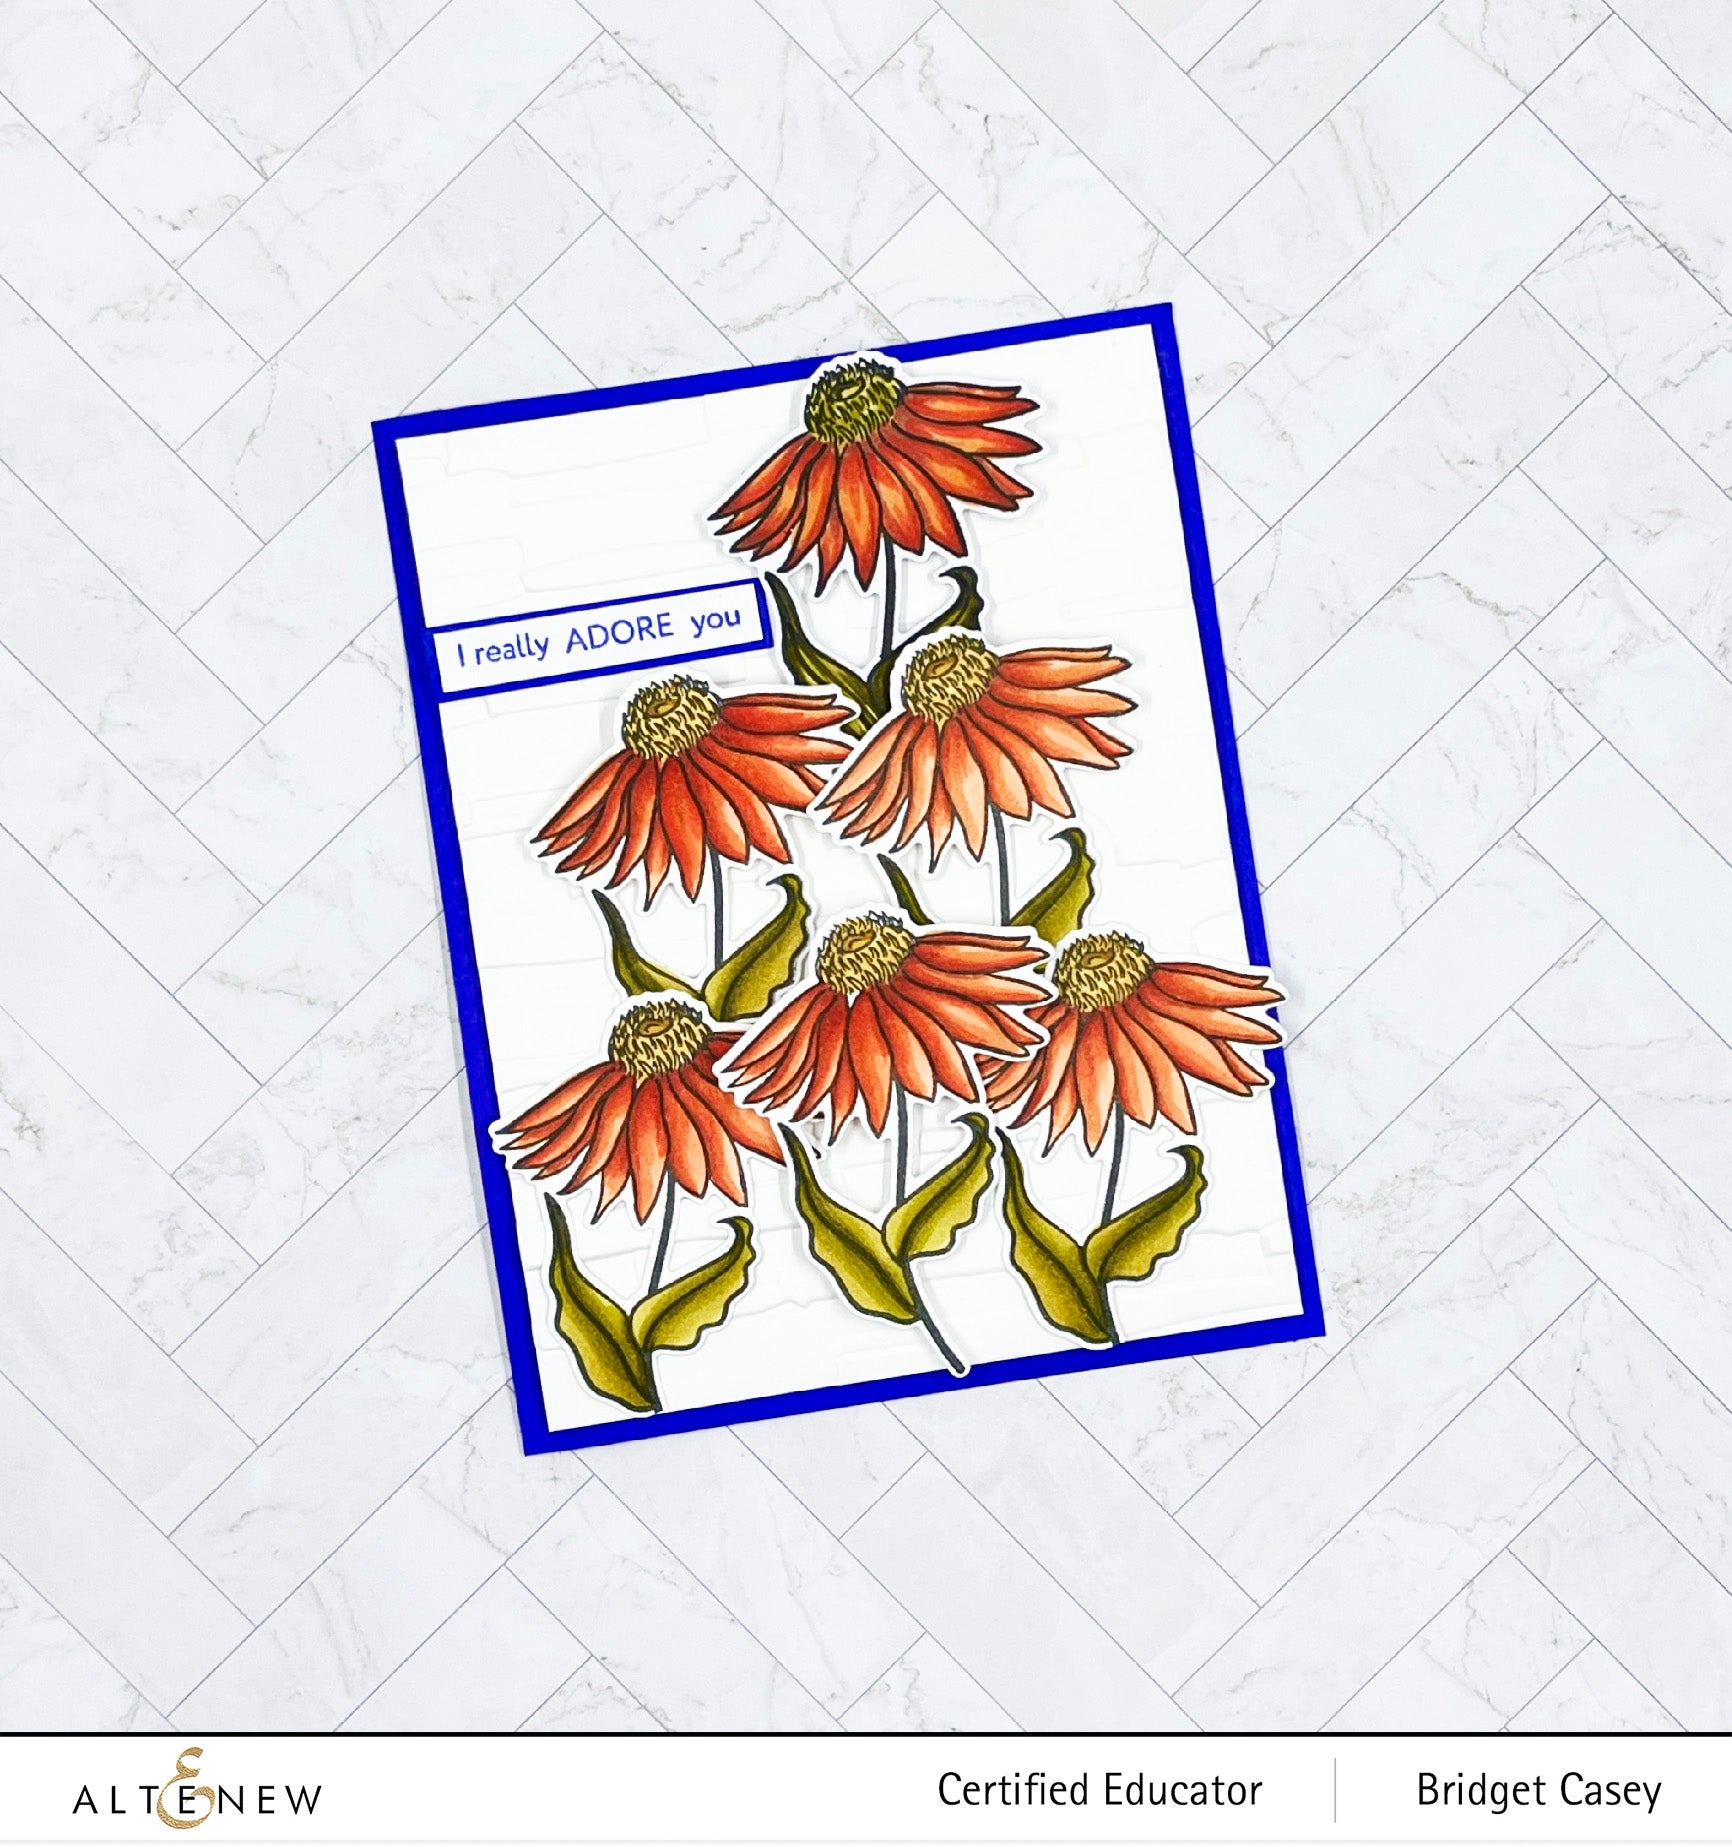 Altenew - Dynamic Duo: Floral Whimsy & Add-on Die Bundle – 3 Wise Crafters